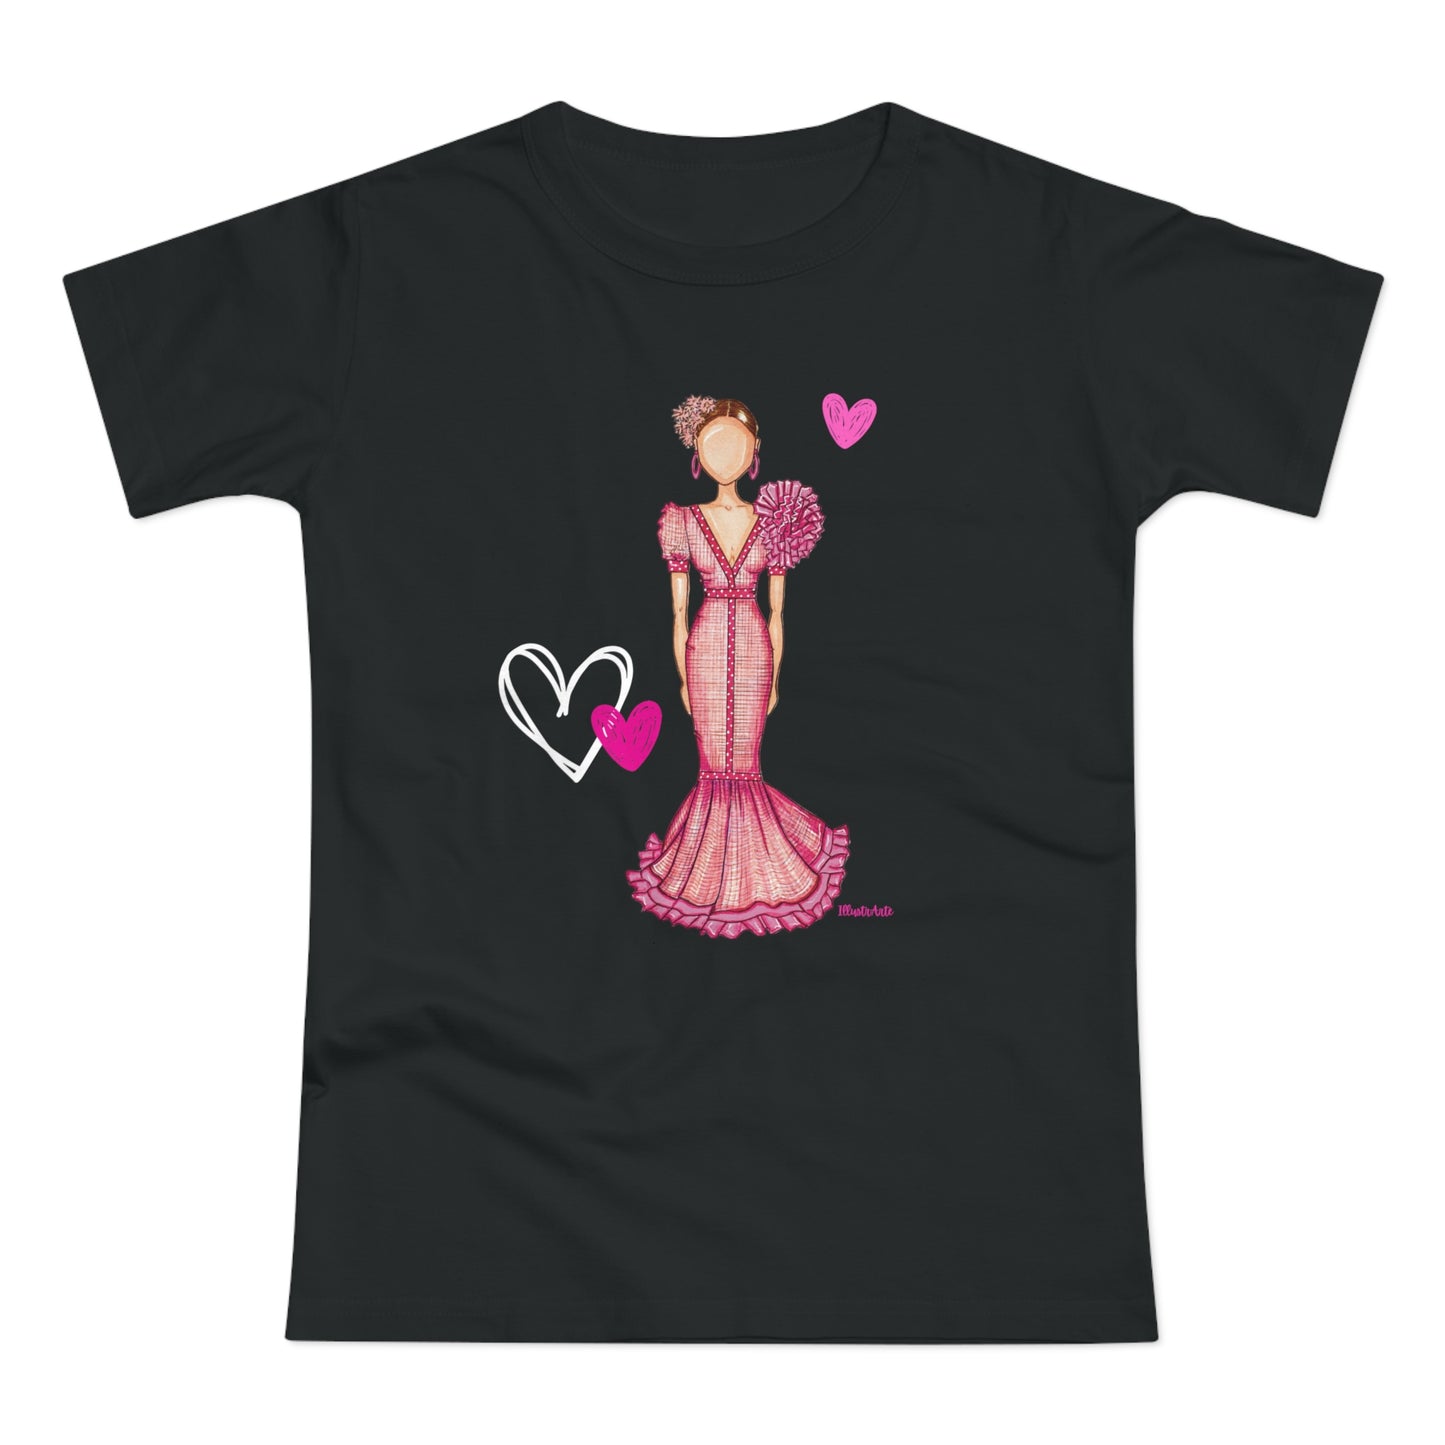 a black t - shirt with a woman in a pink dress